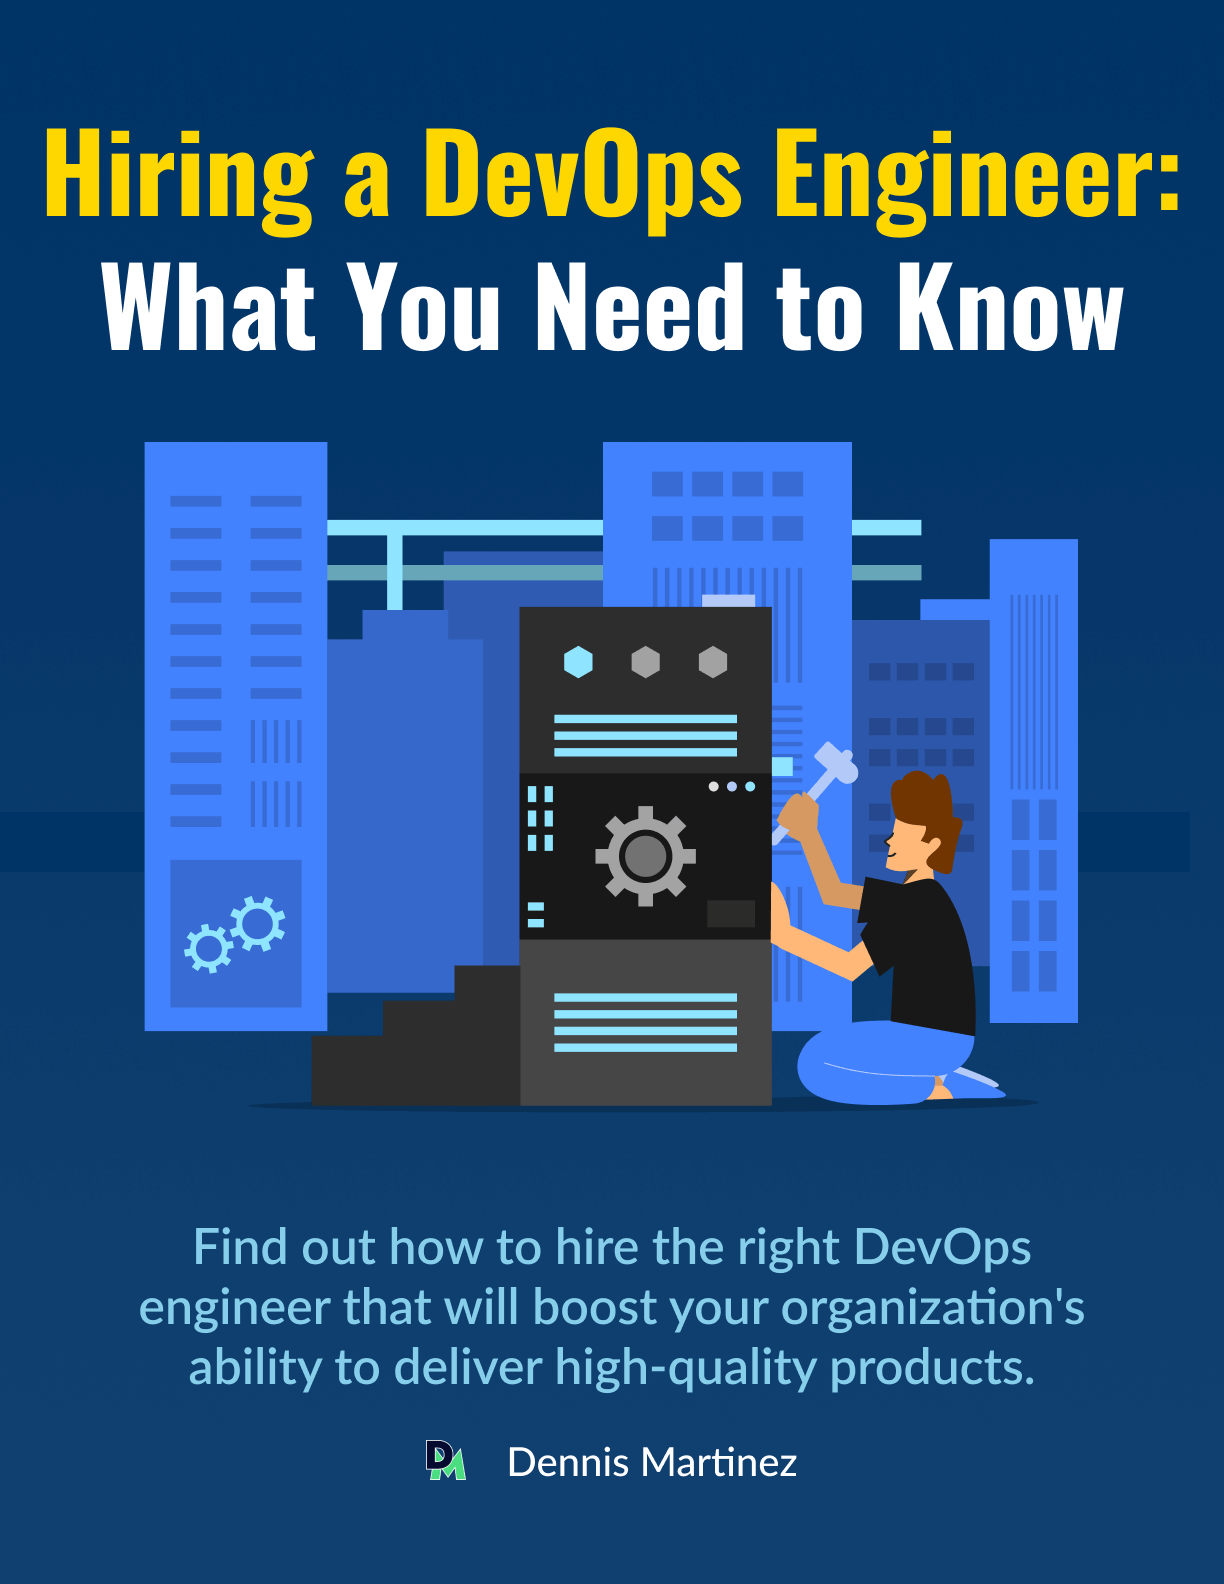 Hiring a DevOps Engineer: What You Need to Know - Guide Cover